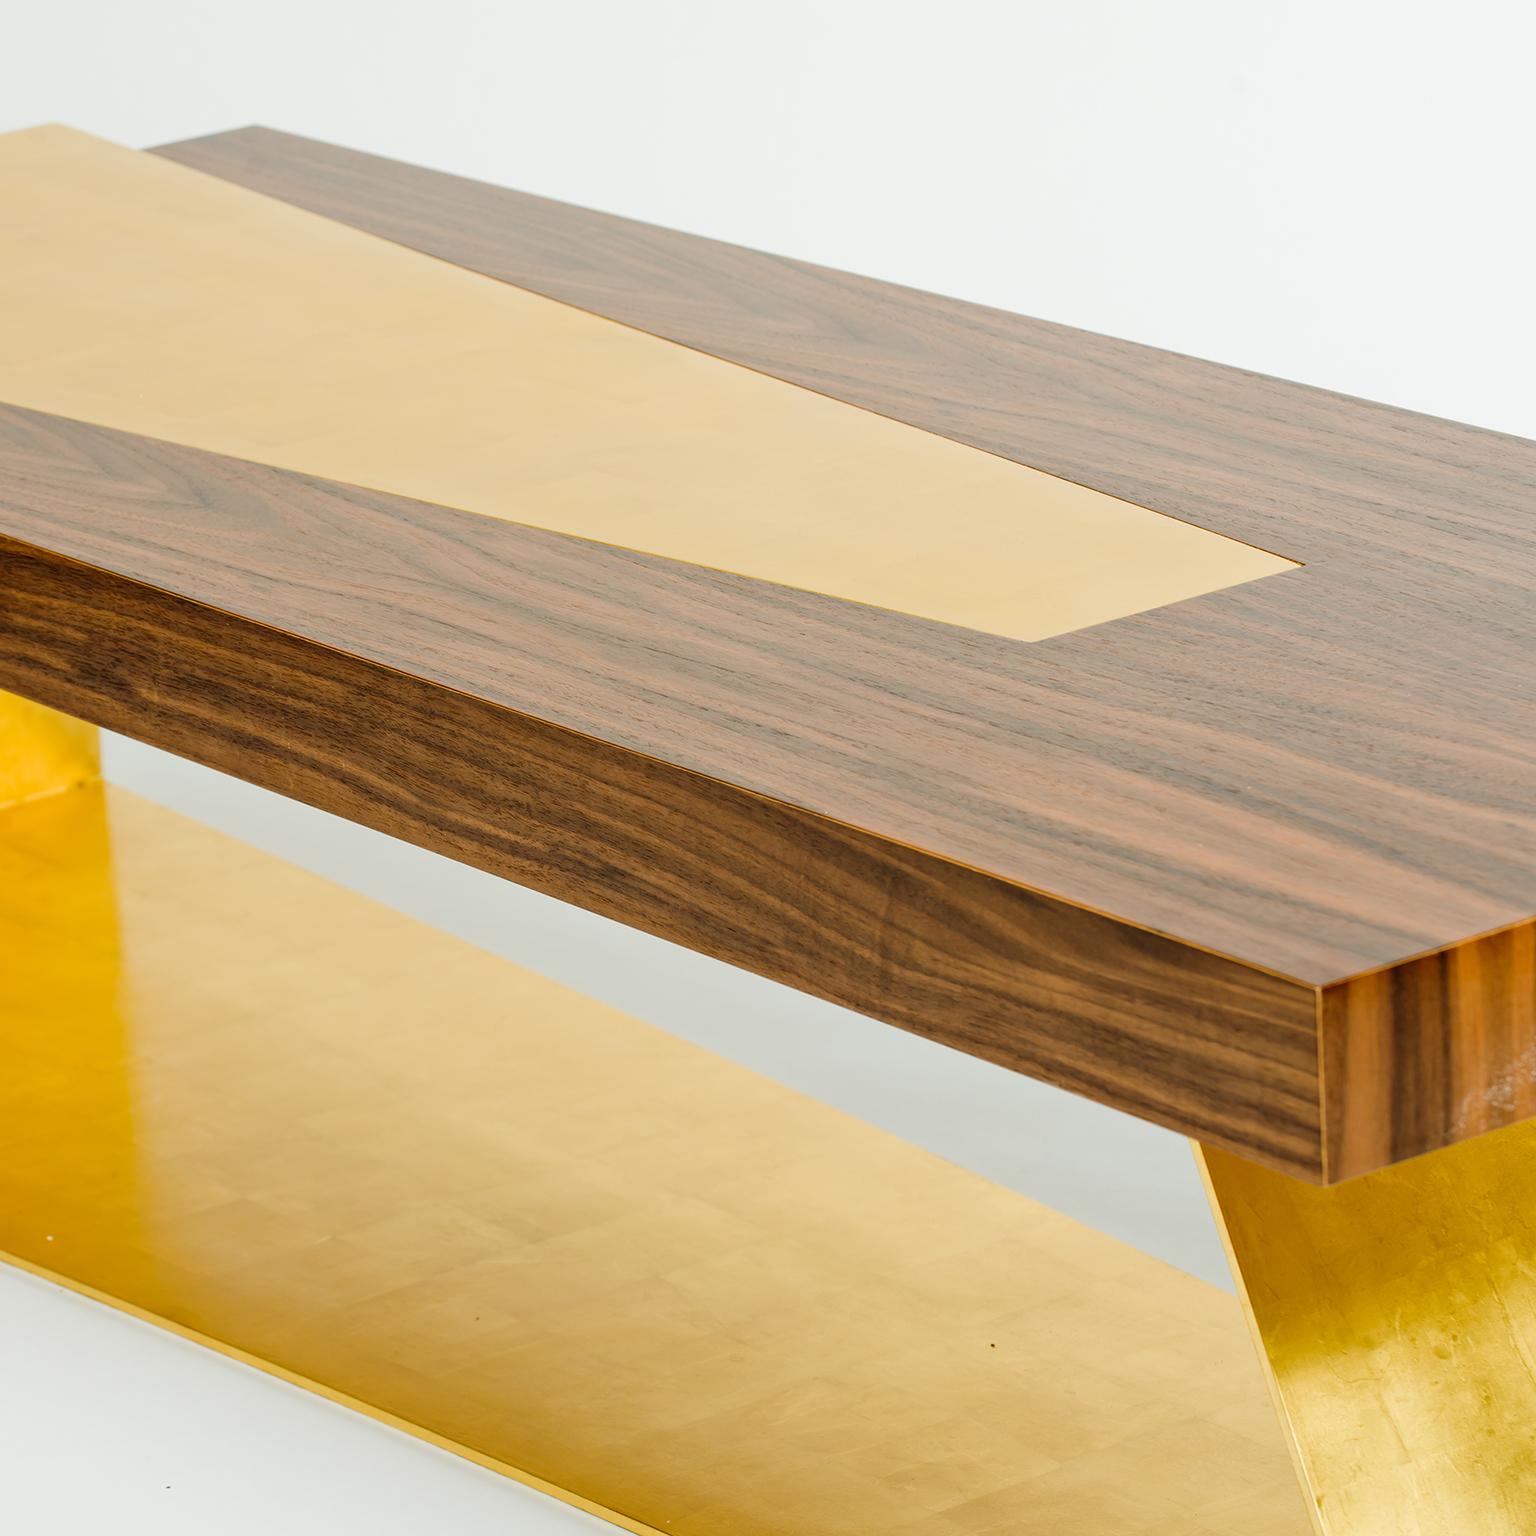 Modern Bowery Bench or Coffee Table, Walnut and Gold Leaf, by Dean and Dahl